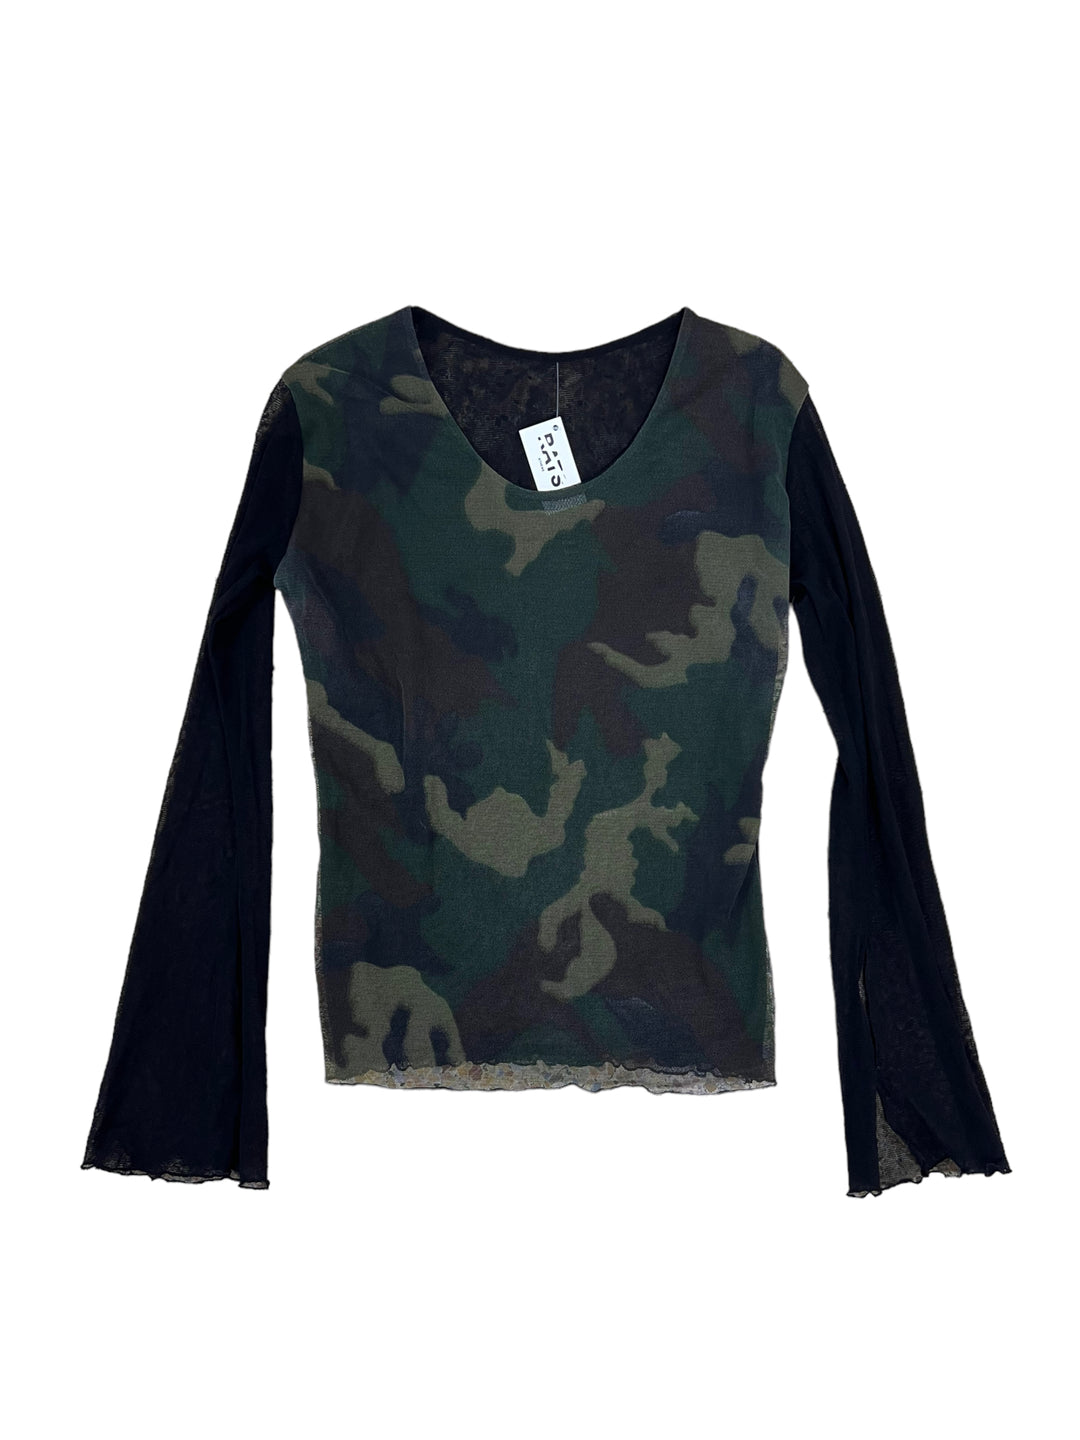 Y2k Camouflage Mesh Top Women’s Small